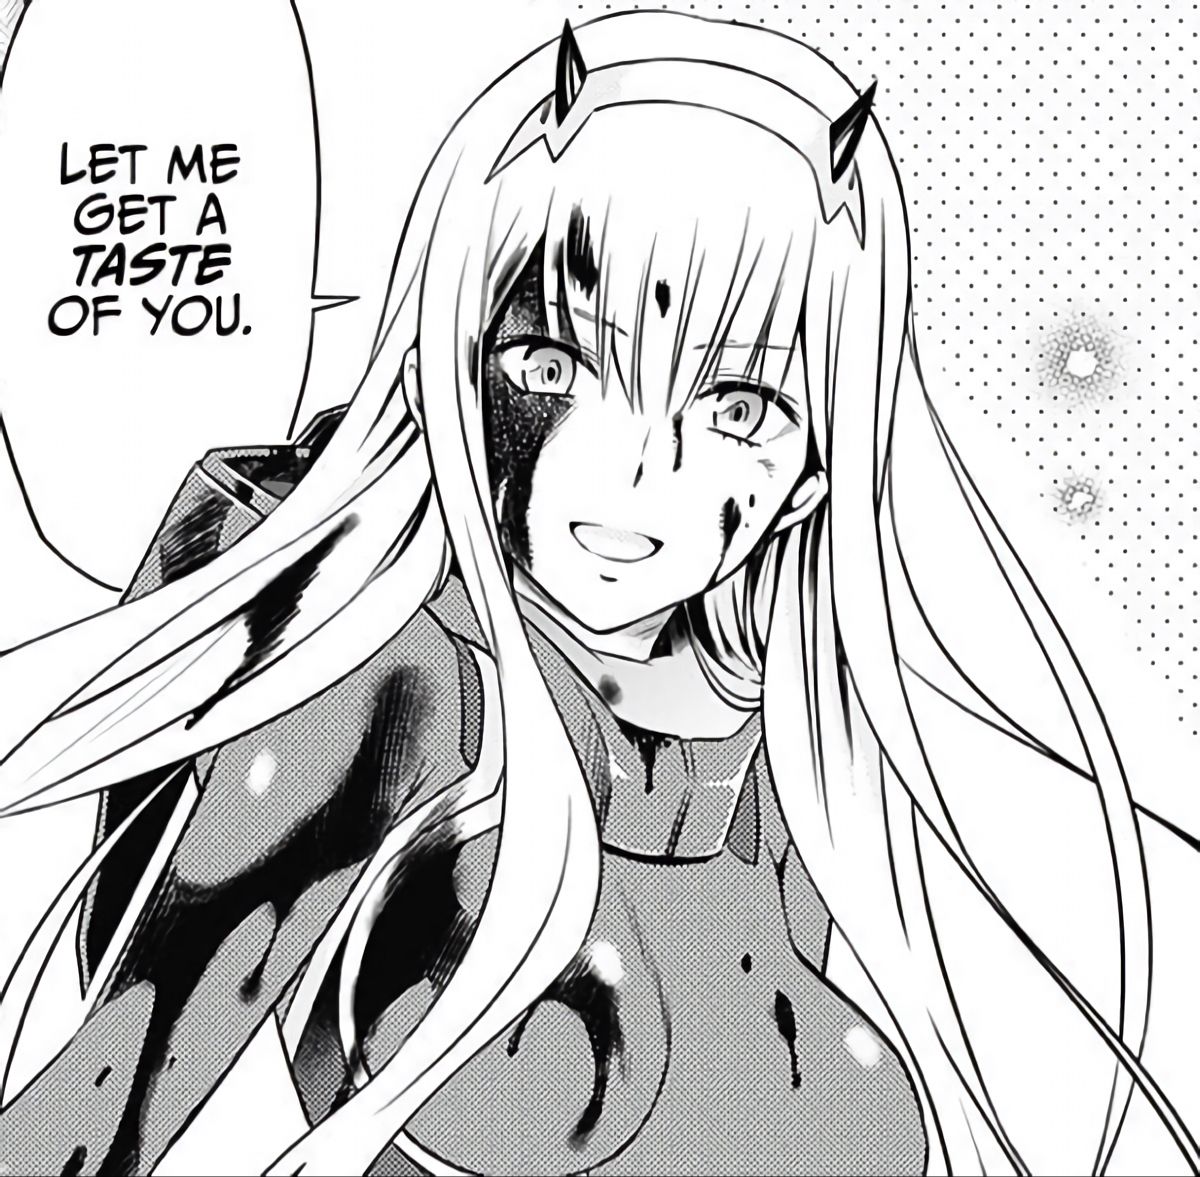 zero two | Darling in the franxx mangá, Zero two, Manga pages